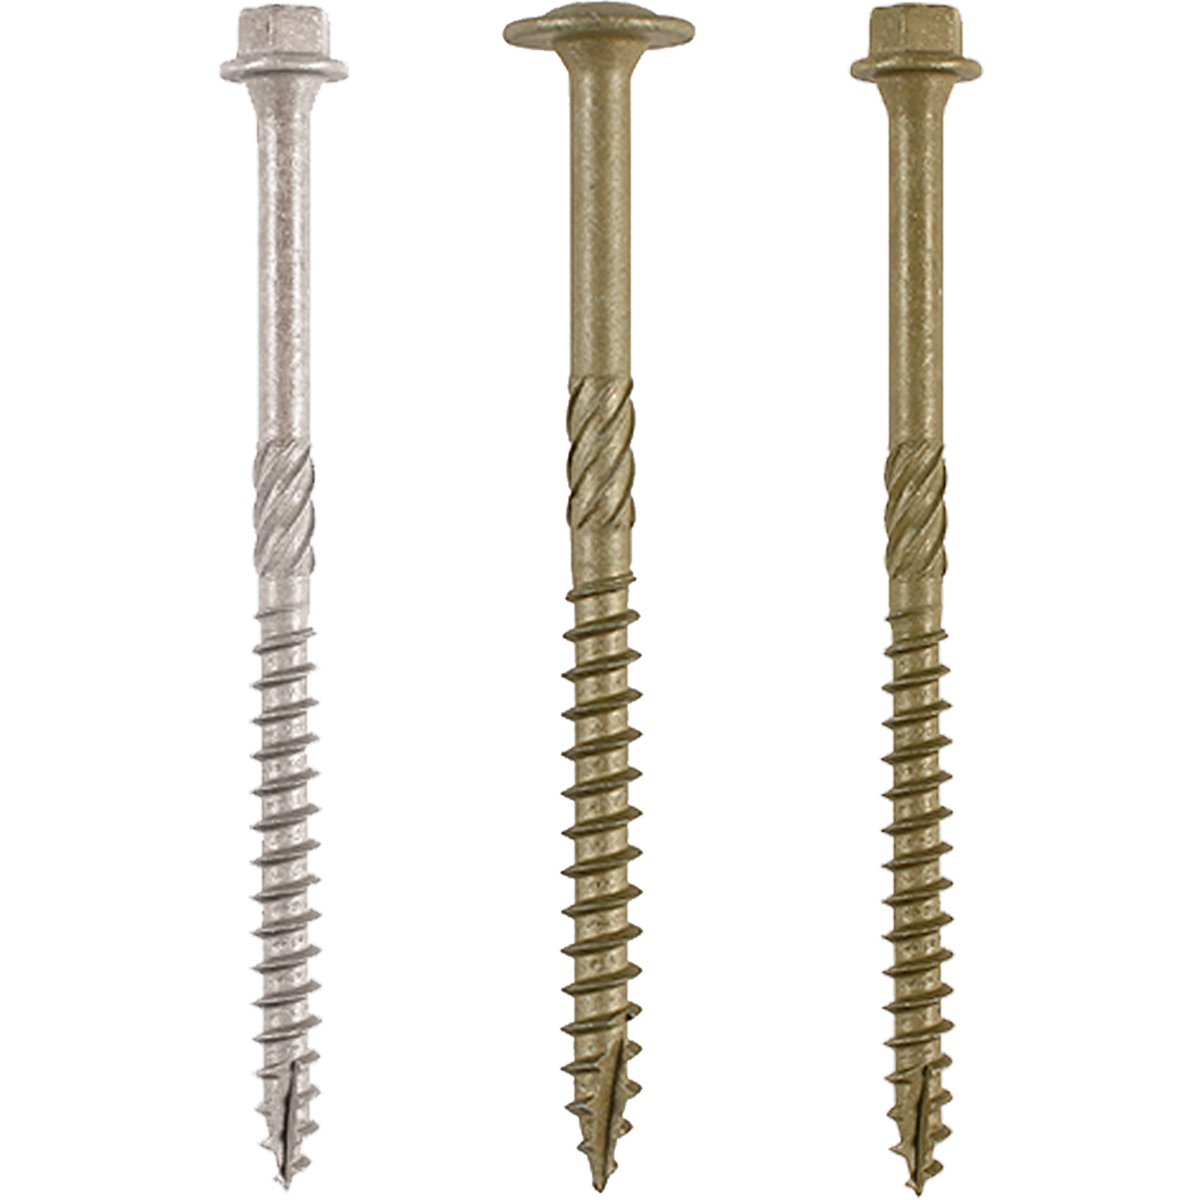 Landscaping and timber screws available in various sizes at competitive prices